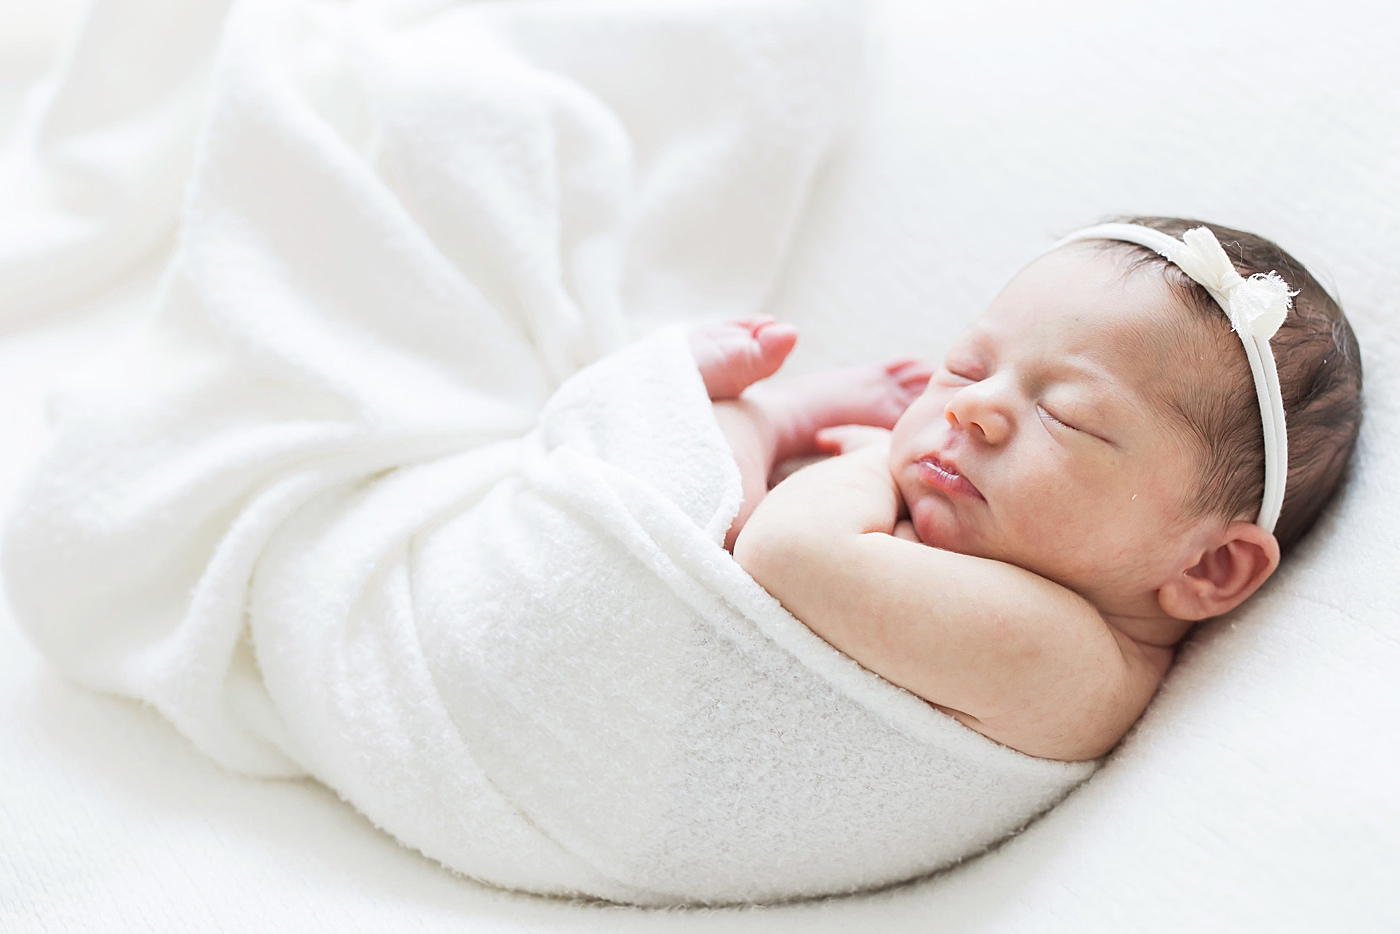 Baby girl swaddled and curled up for newborn photos with Fresh Light Photography.